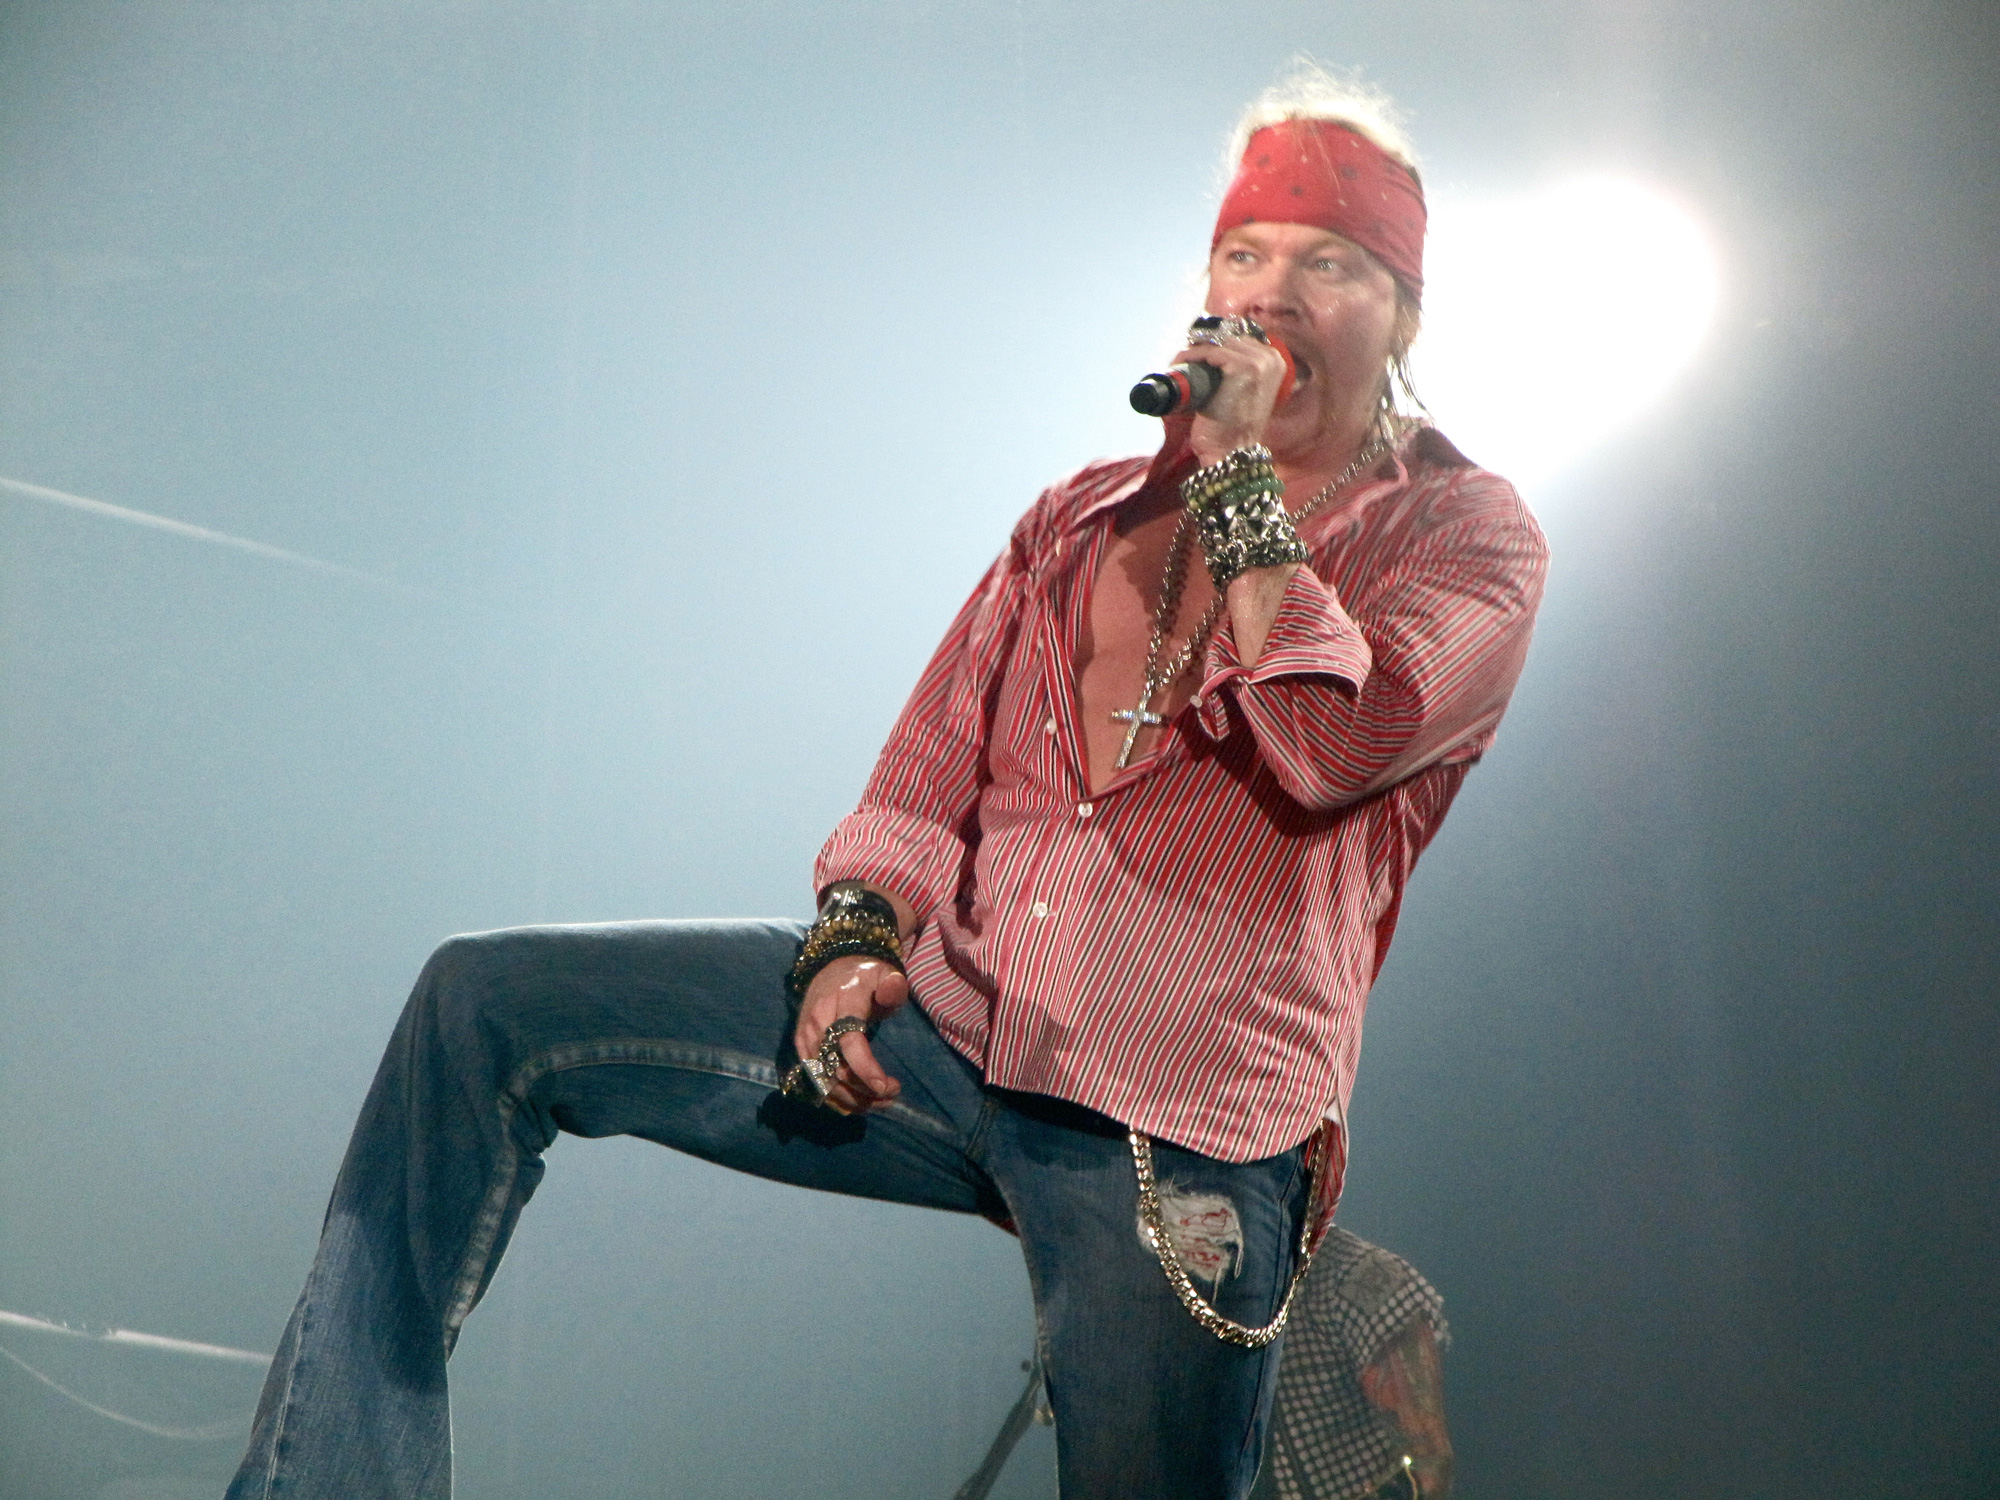 Confirmed: Axl Rose to tour as AC/DC singer